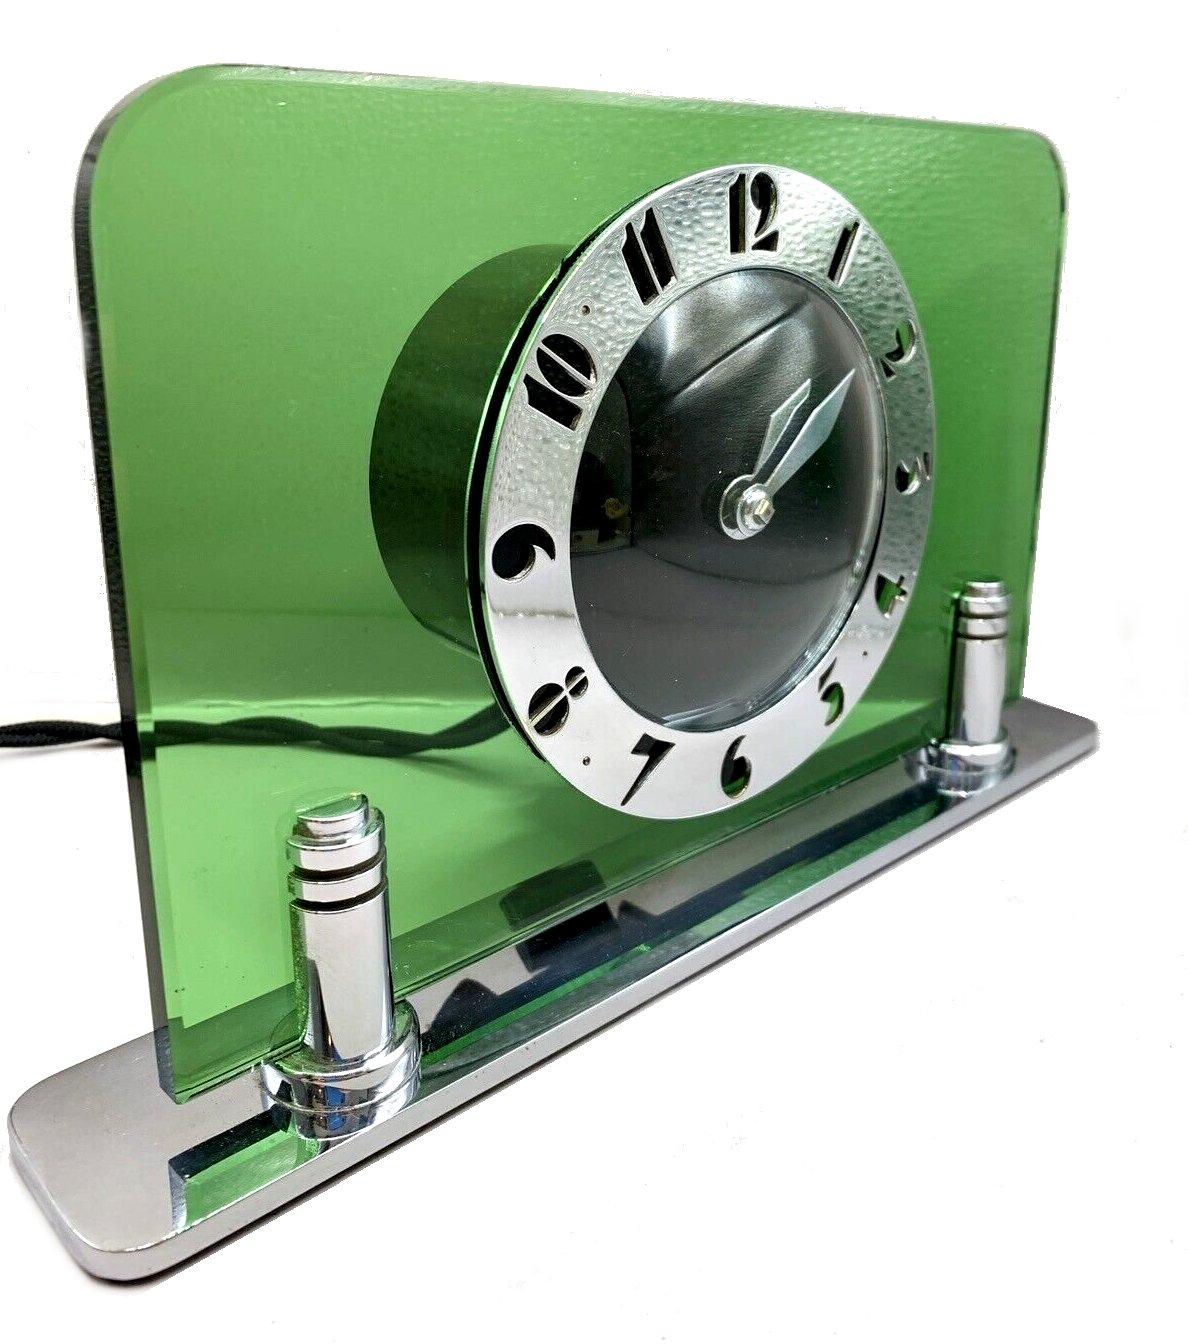 Original 1930's Art Deco Modernist Green glass and chrome clock by the English clock makers Smiths. Beautiful pea green glass with a black dial face and fretted chrome stylised deco numerals. Fabulous condition, full working order. This is Art Deco